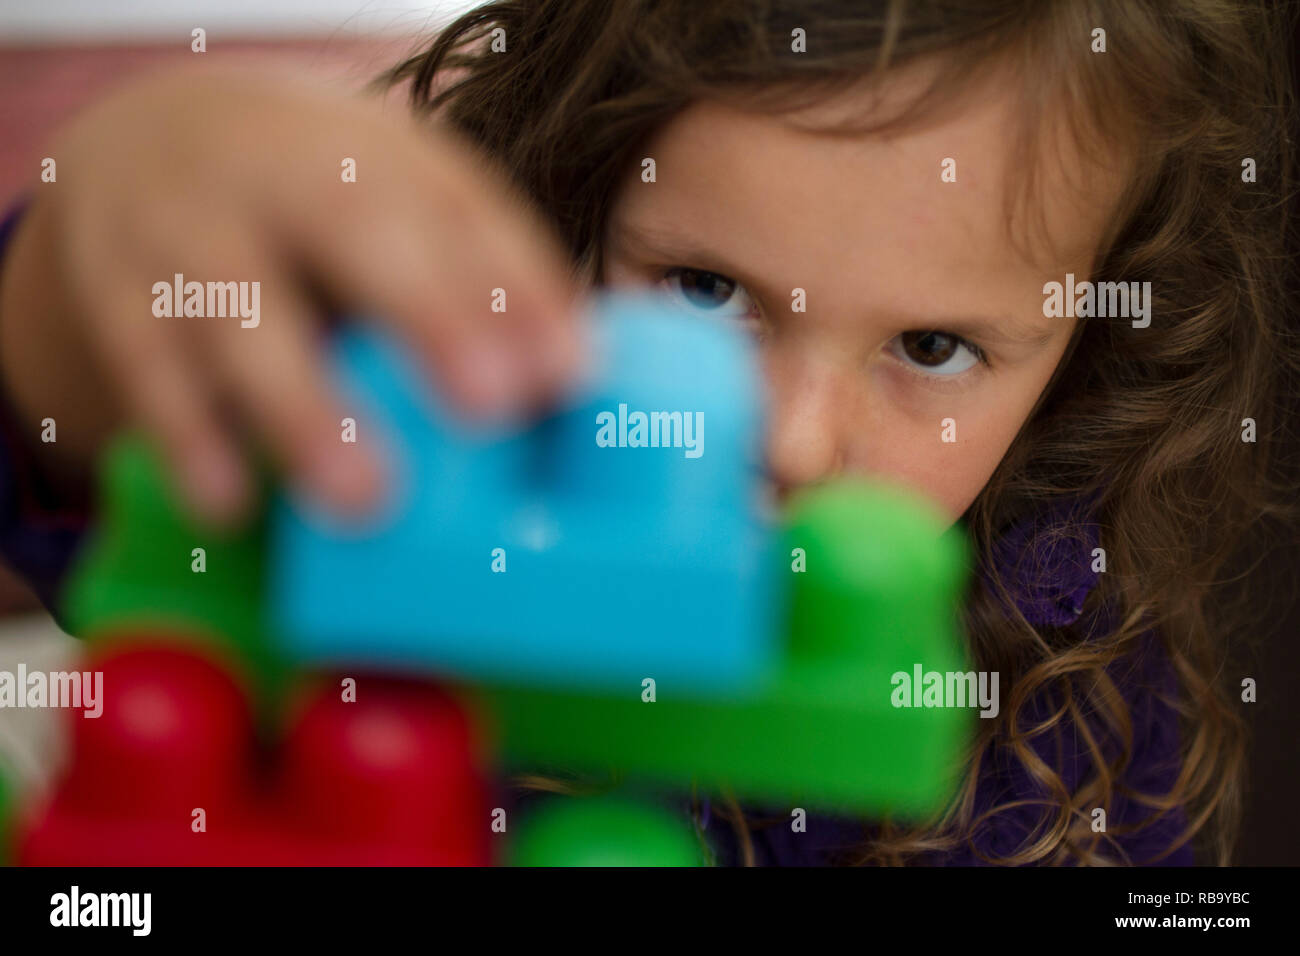 Young girl plays with plastic building blocks Stock Photo